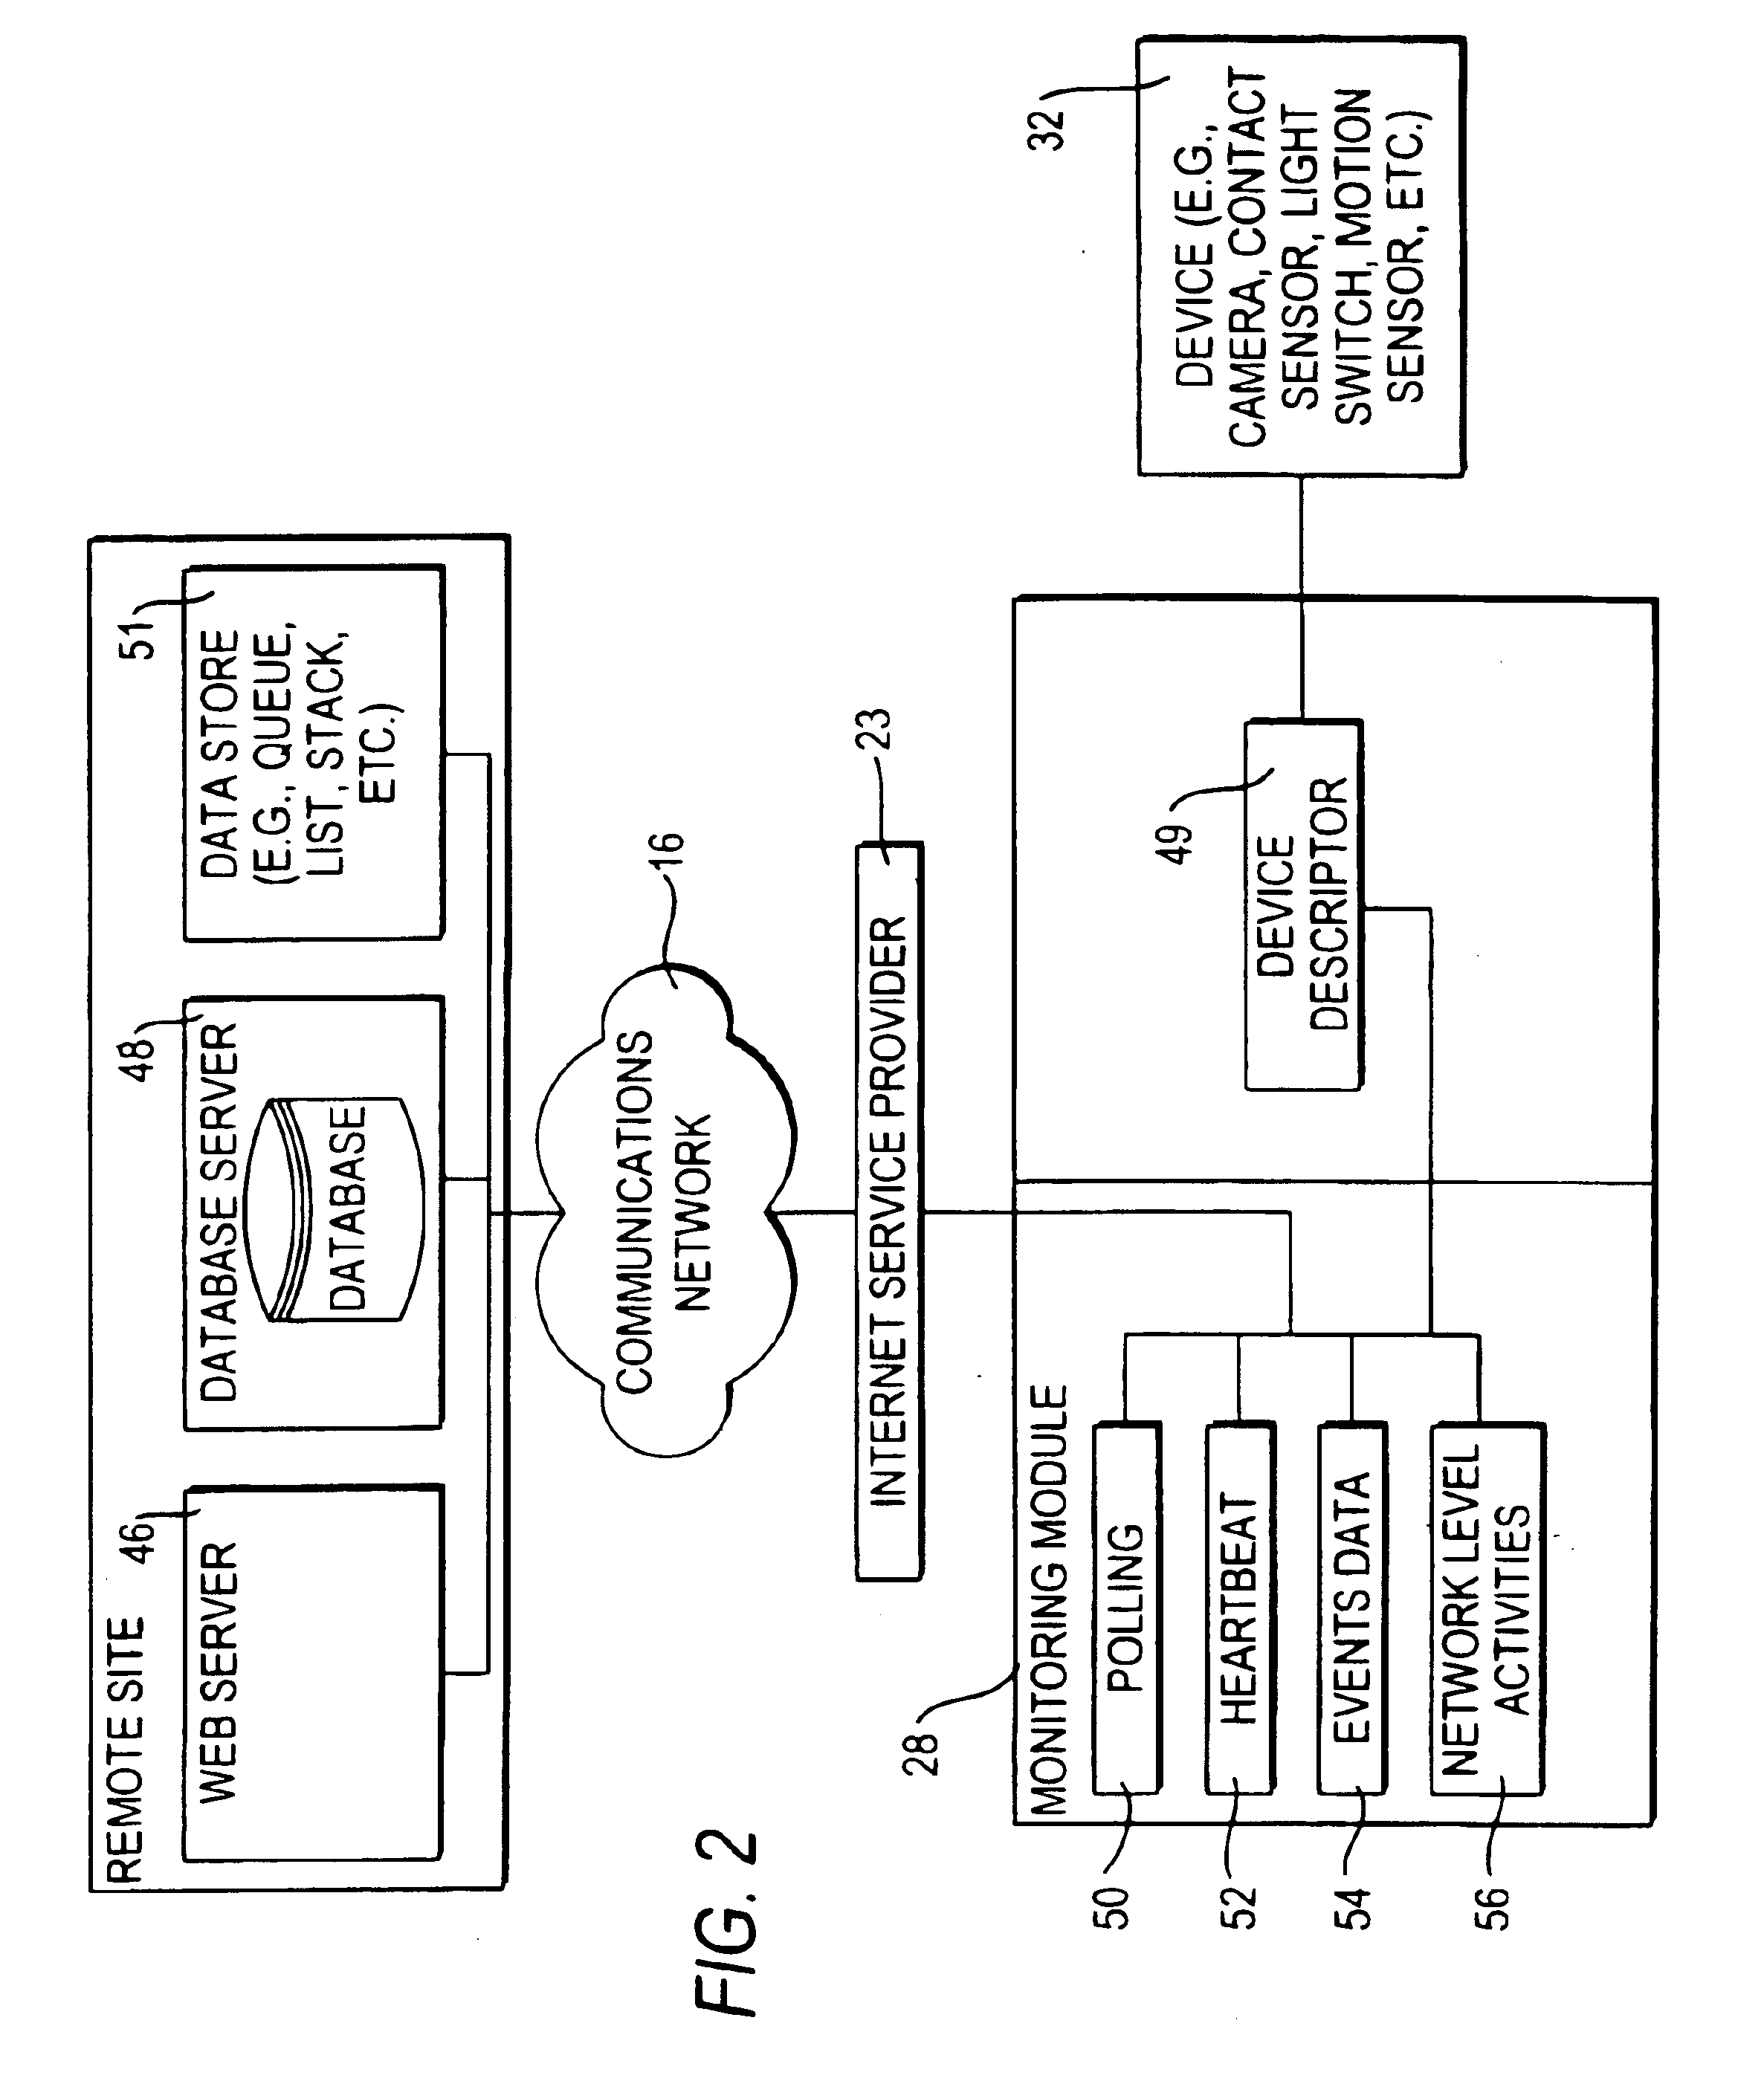 Systems and methods for the automatic registration of devices